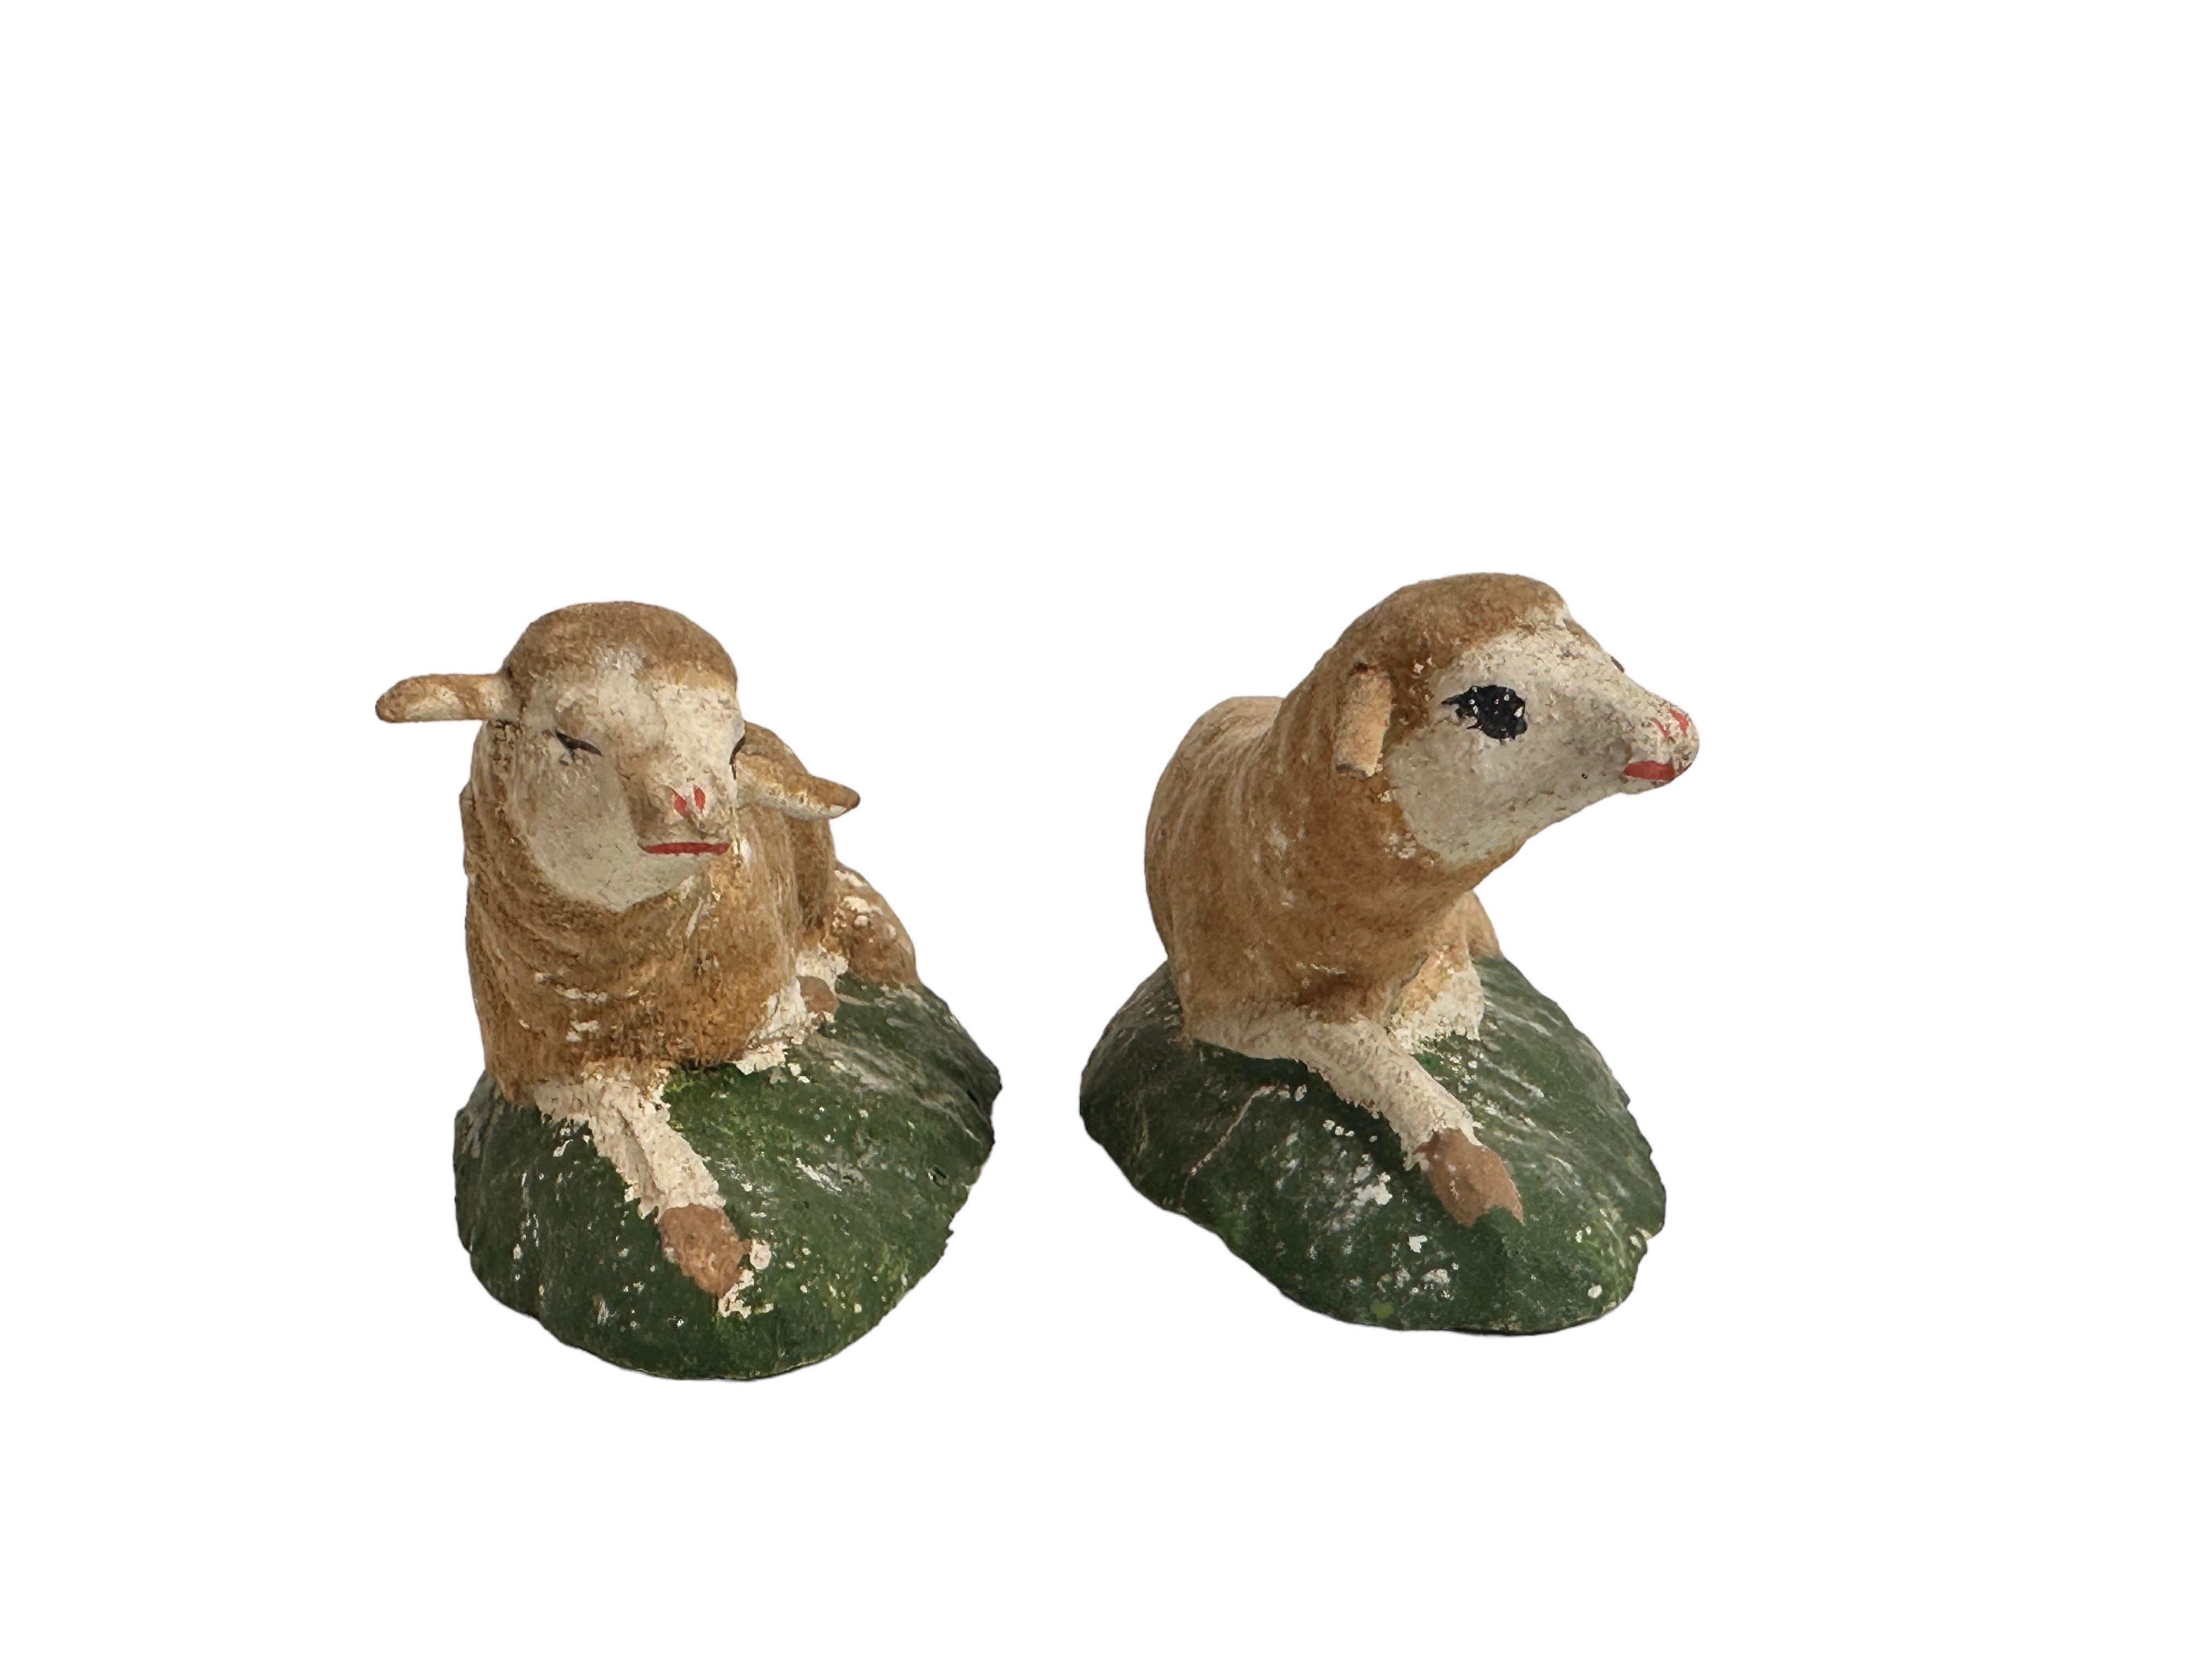 Lot of Five Sheep Nativity Putz Toy Antique German Erzgebirge Christmas 1880s For Sale 5